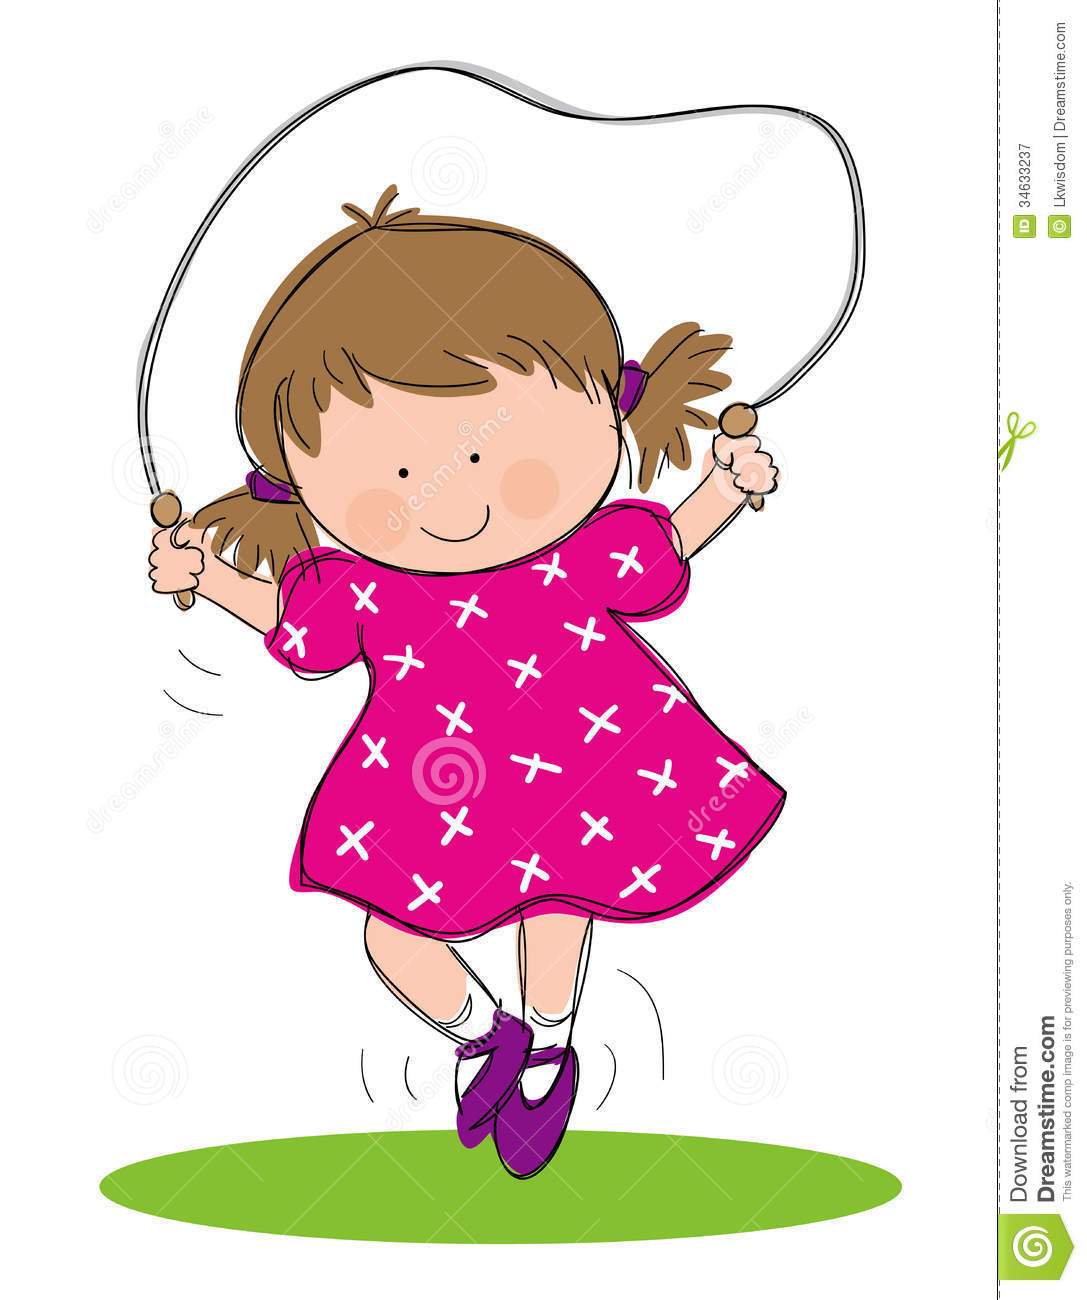 Hand Drawn Picture Of Little Girl Skipping Illustrated In A Loose